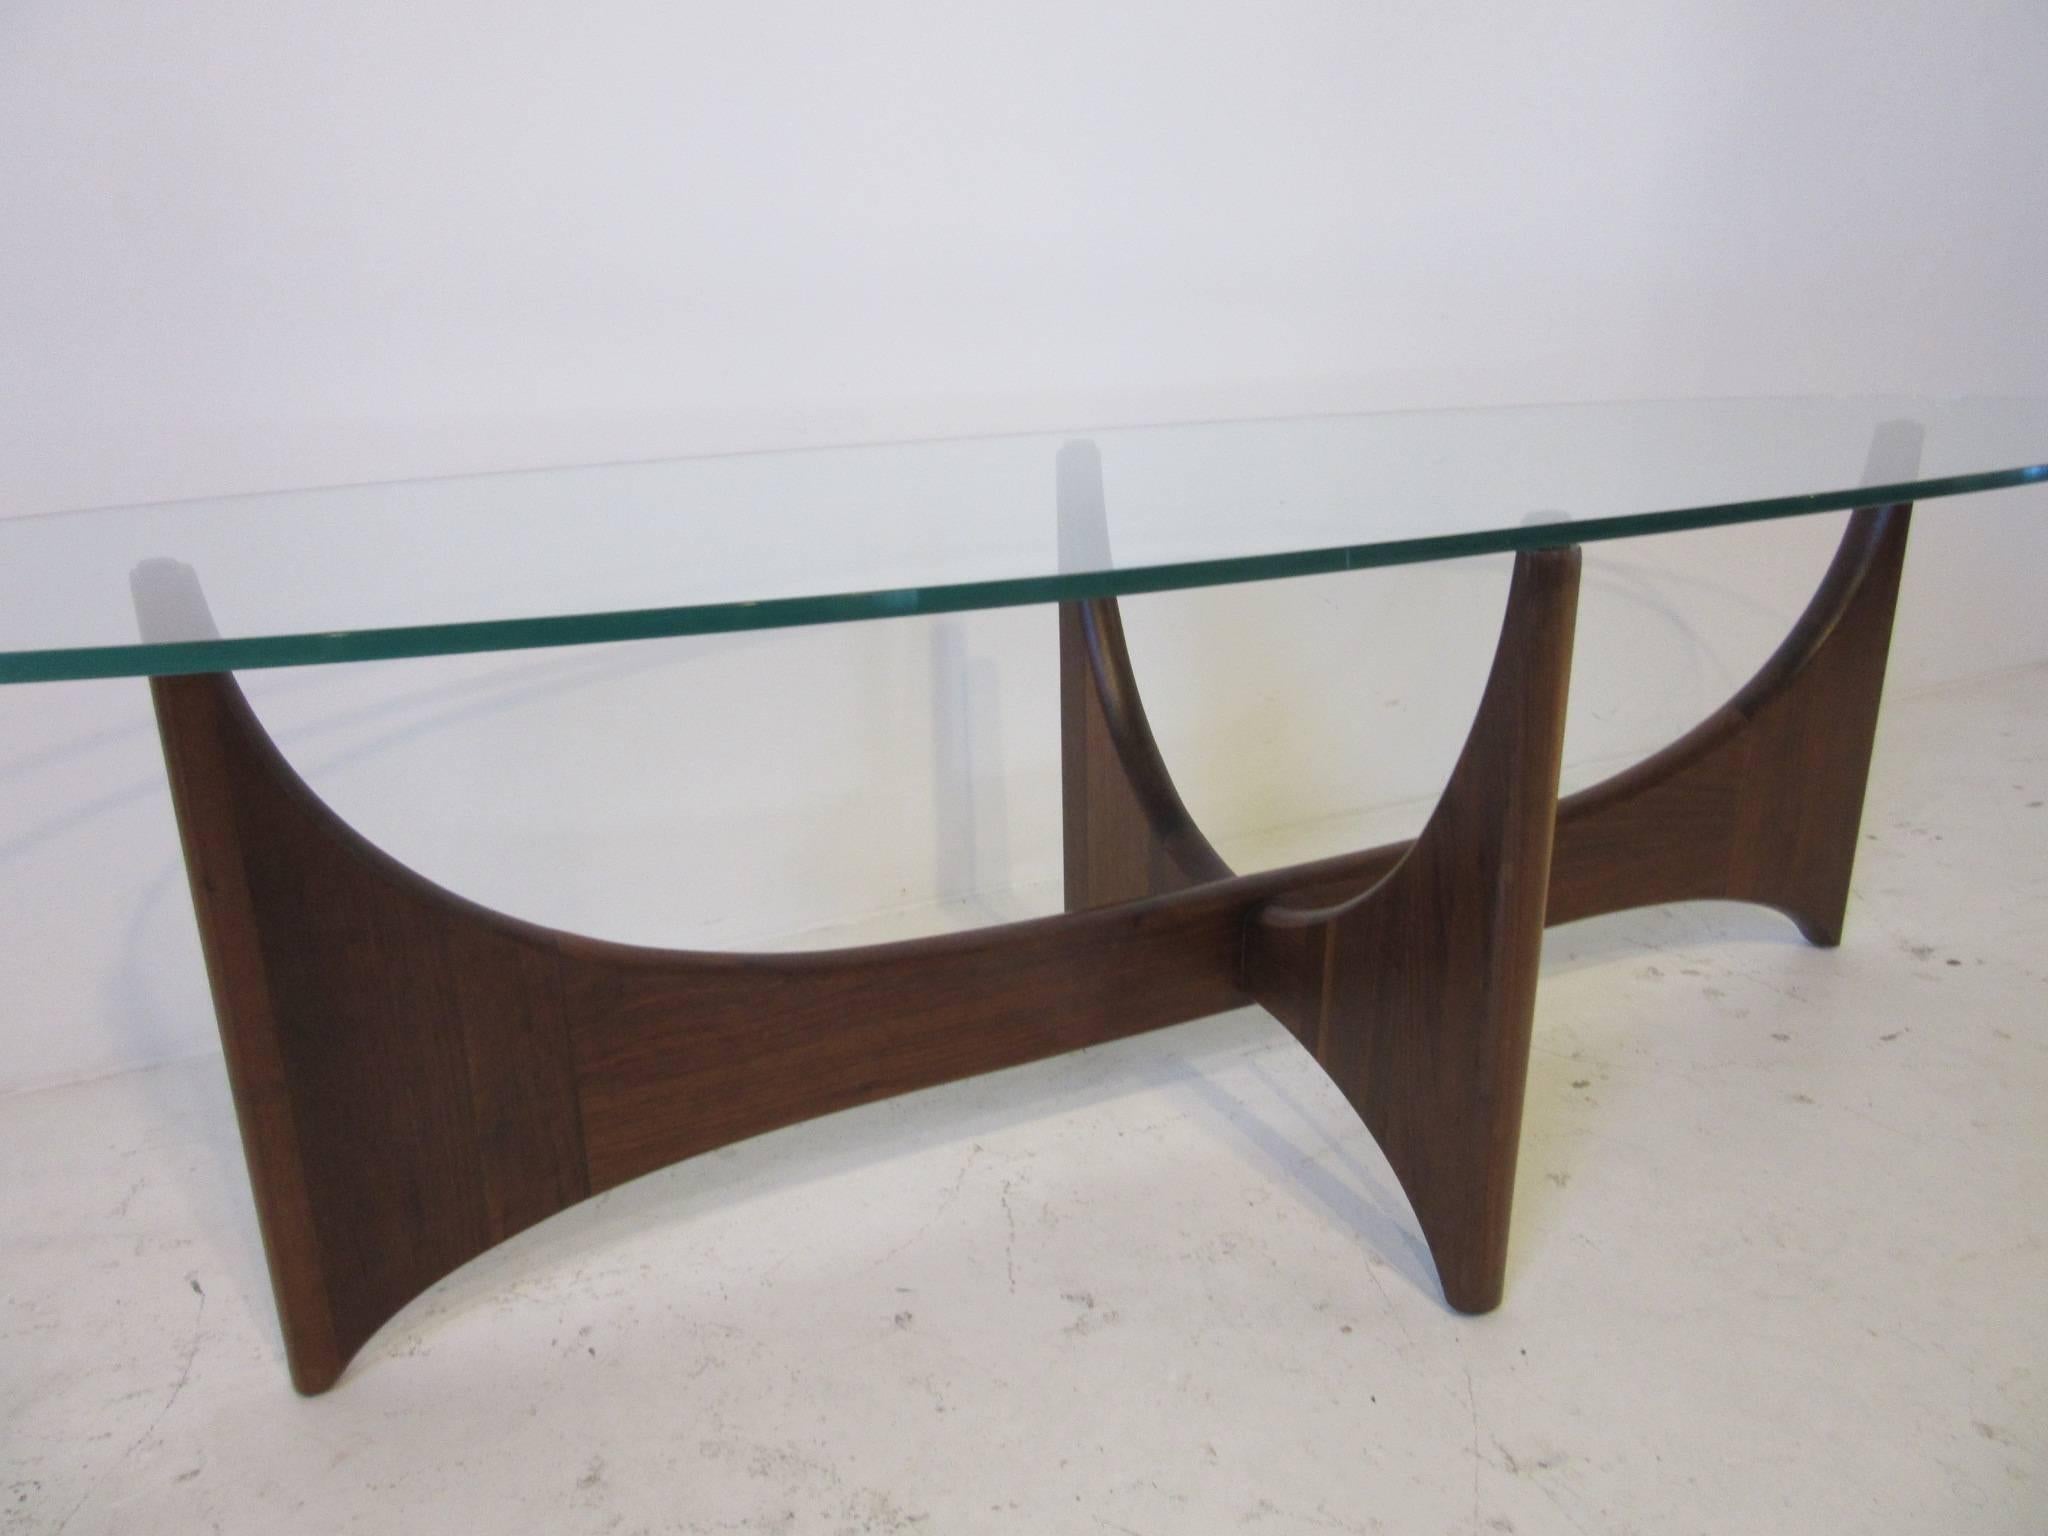 American Sculptural Walnut and Glass Adrian Pearsall Coffee Table